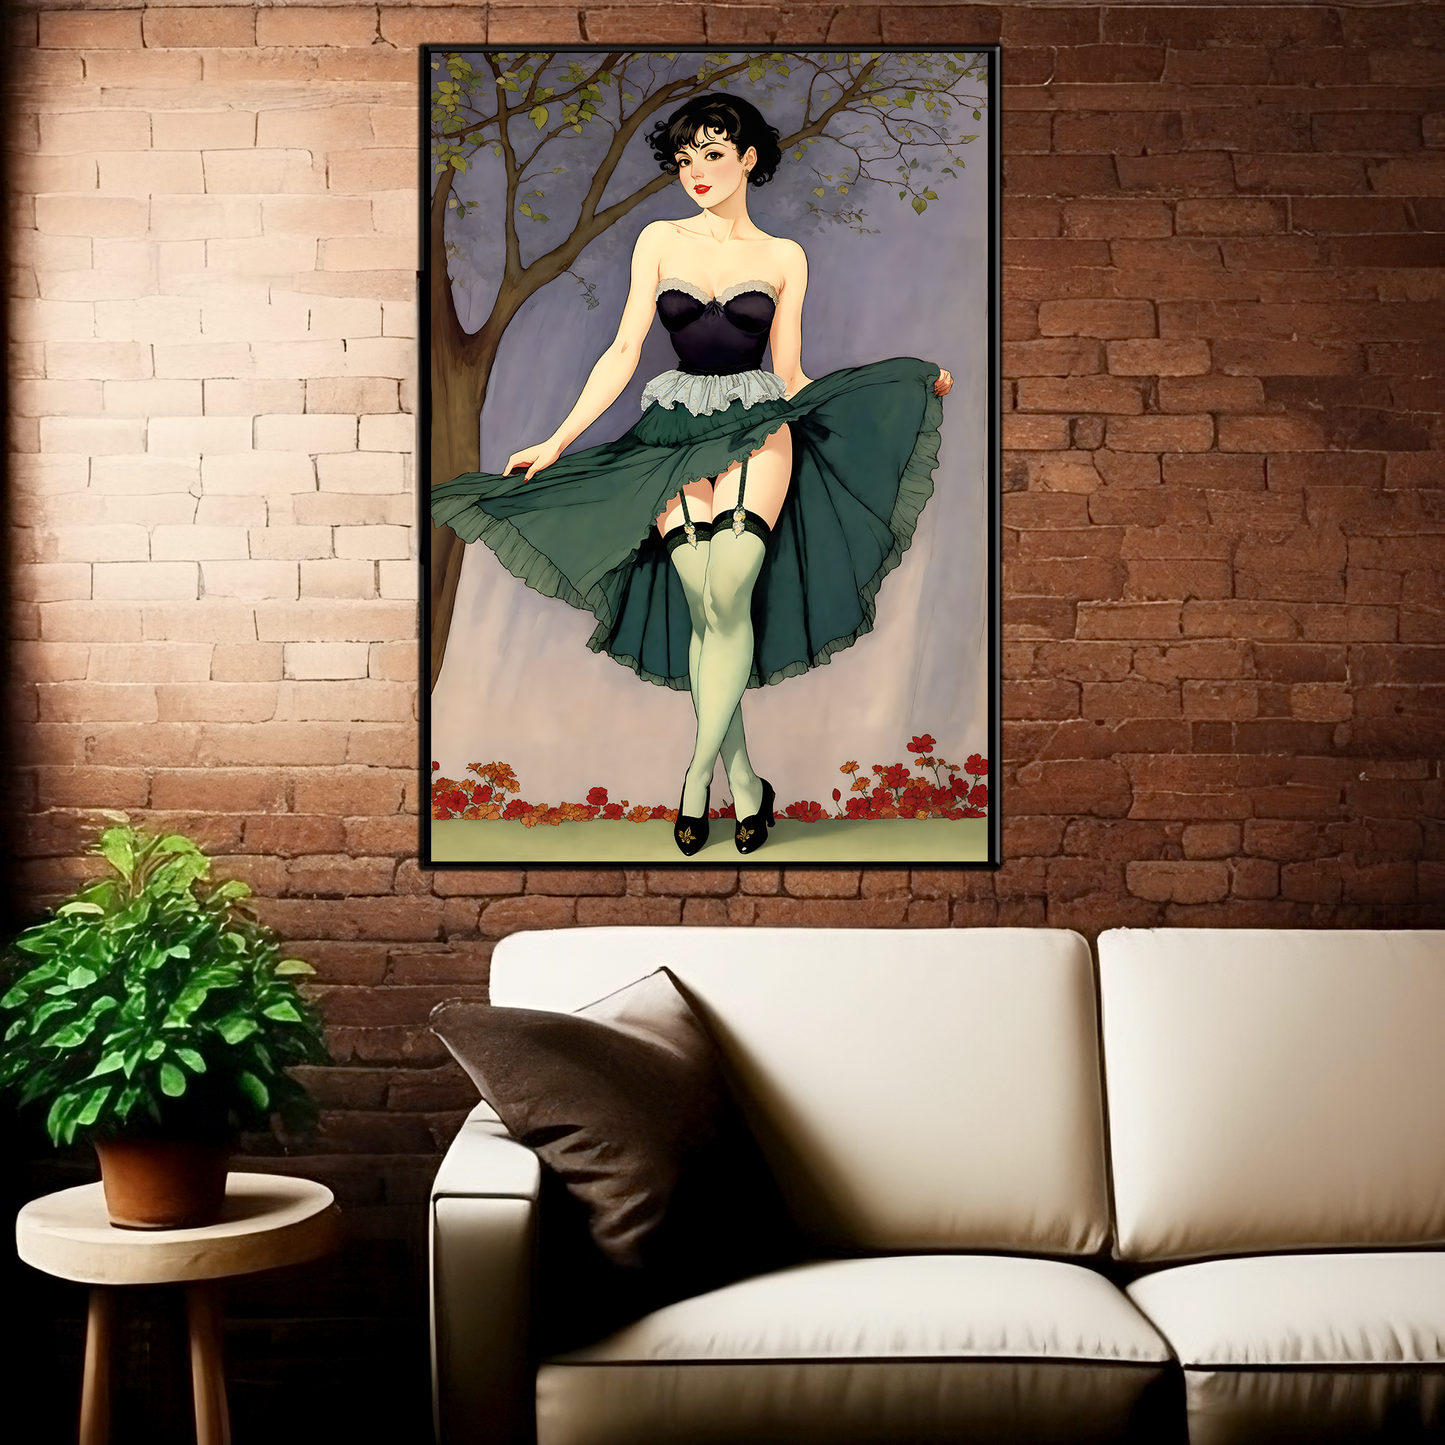 Daily Pinup #61 - Simpler Times Wall Art